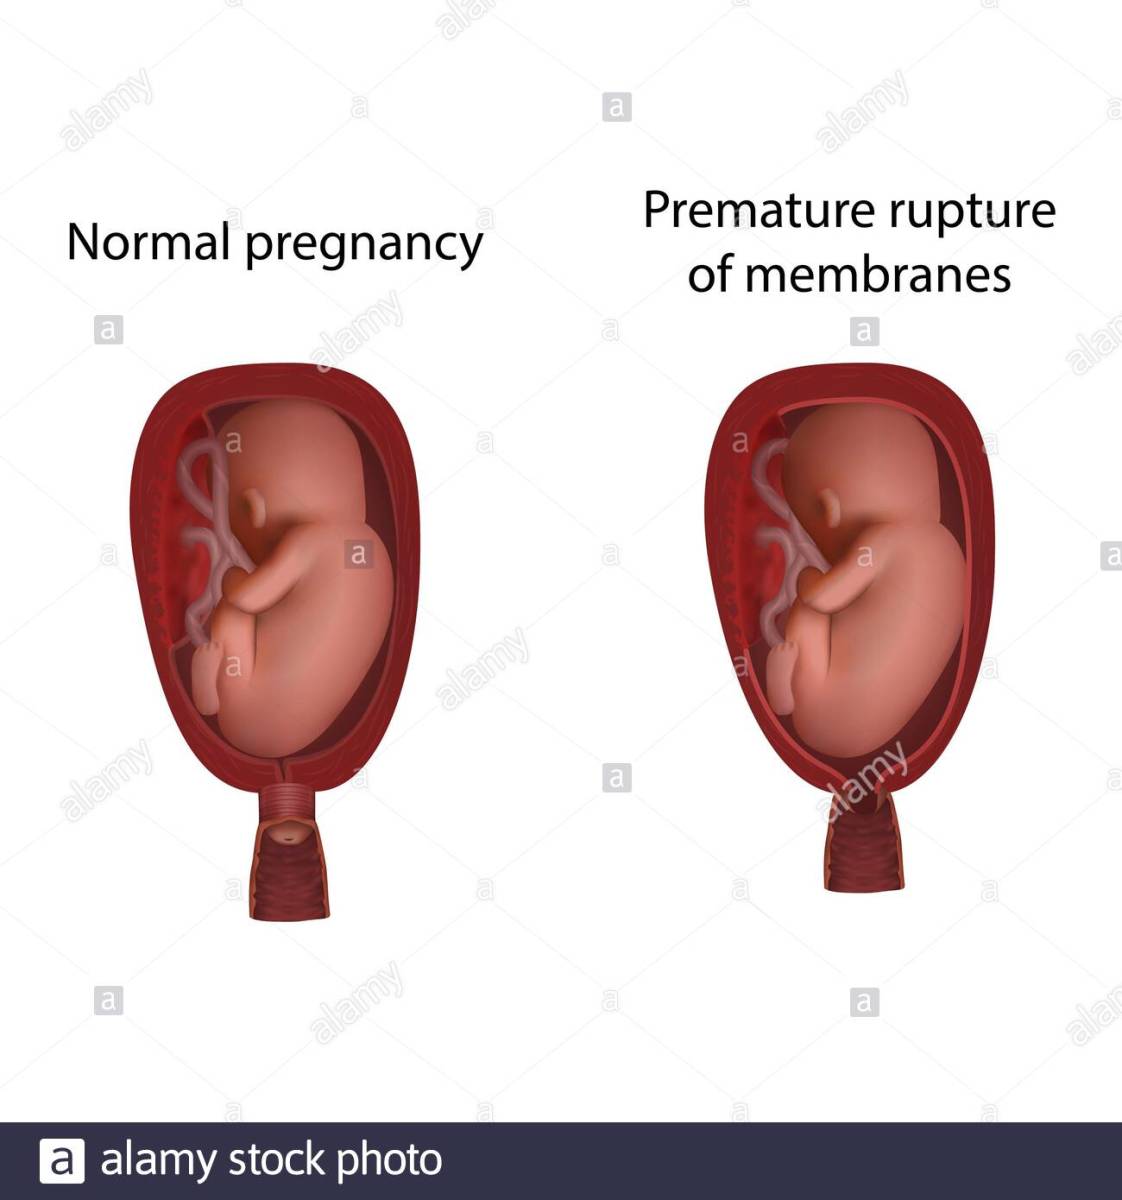 Pprom ( Preterm Premature Rupture of Membrane) at 22 Weeks of Pregnancy